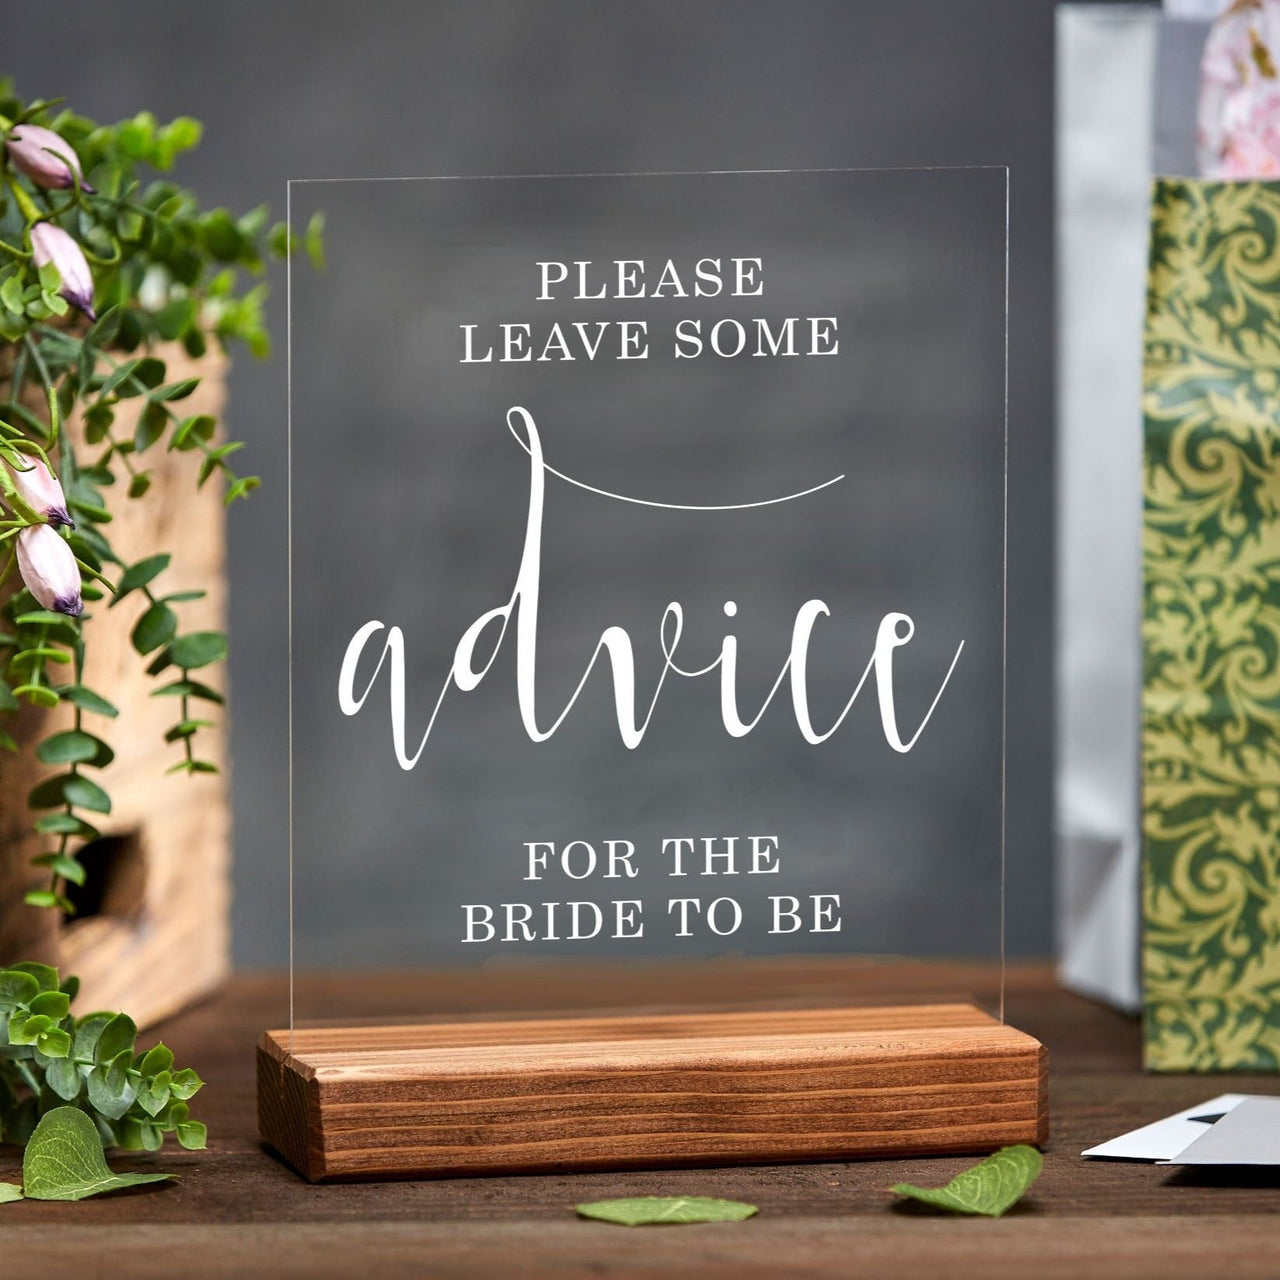 Leave Advice Acrylic Bridal Shower Sign - Rich Design Co